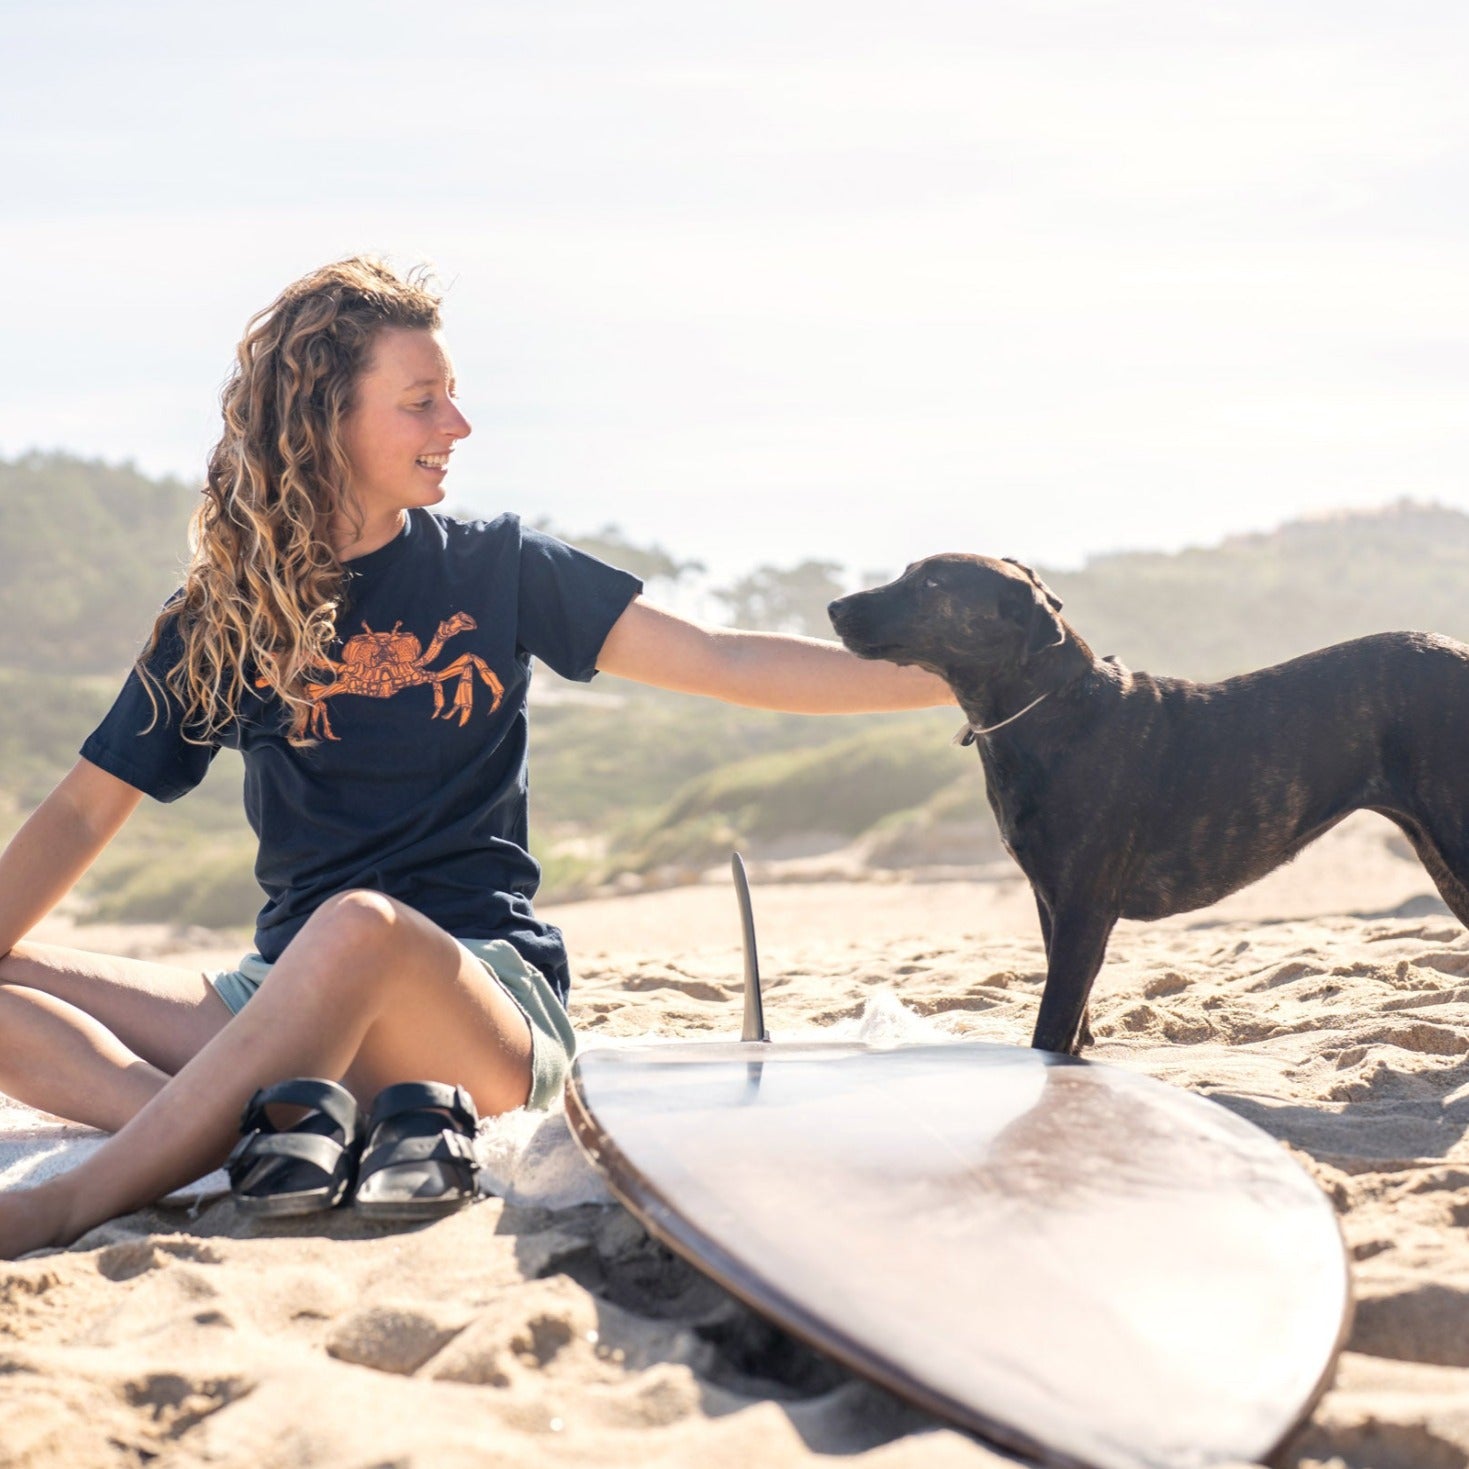 Girl sitting on beach with surfboard while petting dog. She is wearing a blue tee with a Dungeness crab printed on it.  